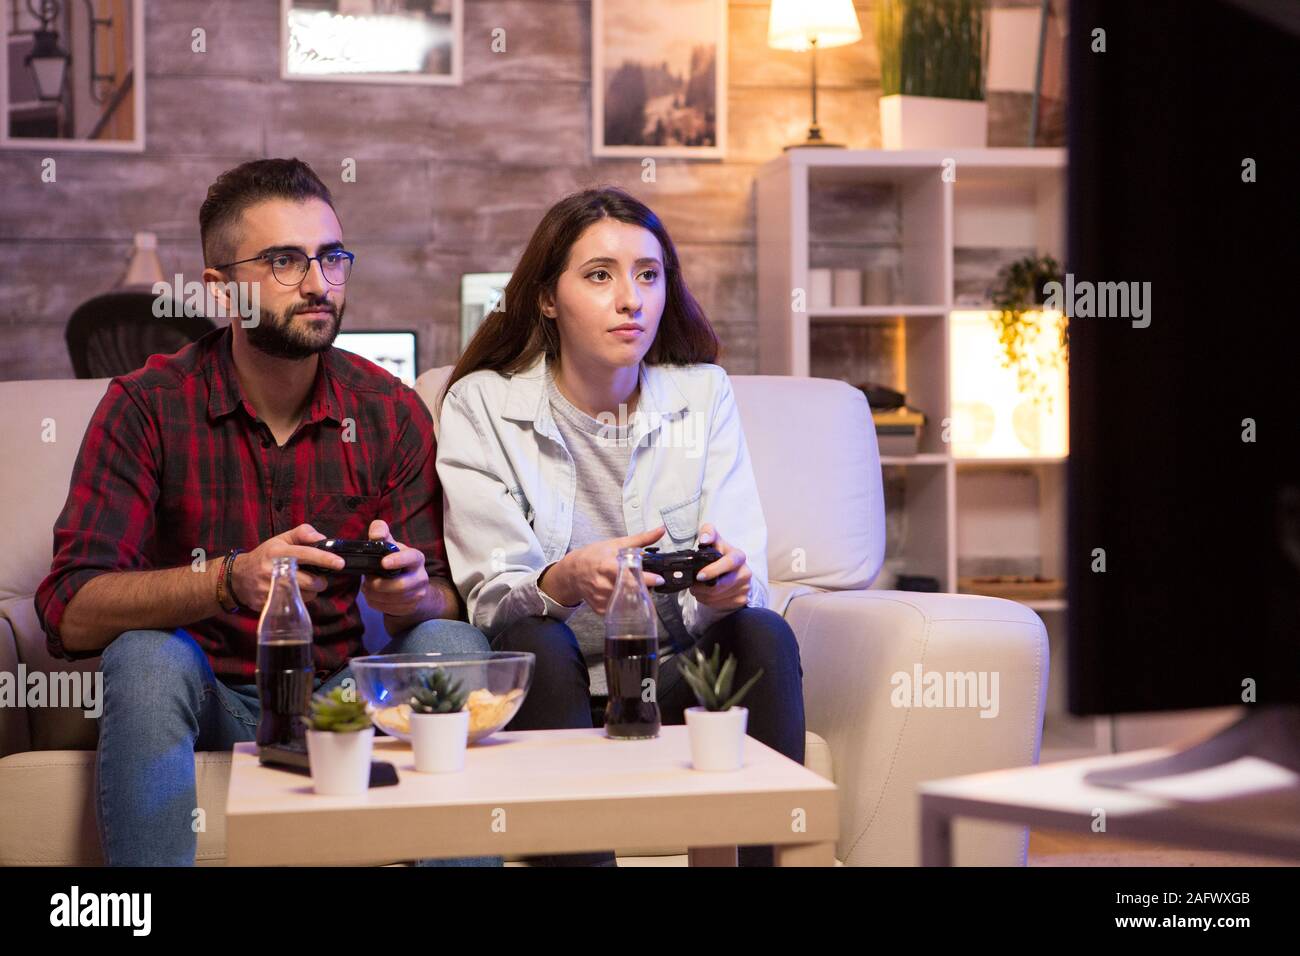 Beautiful young couple having fun playing video games with controllers at night. Couple sitting on sofa. Stock Photo